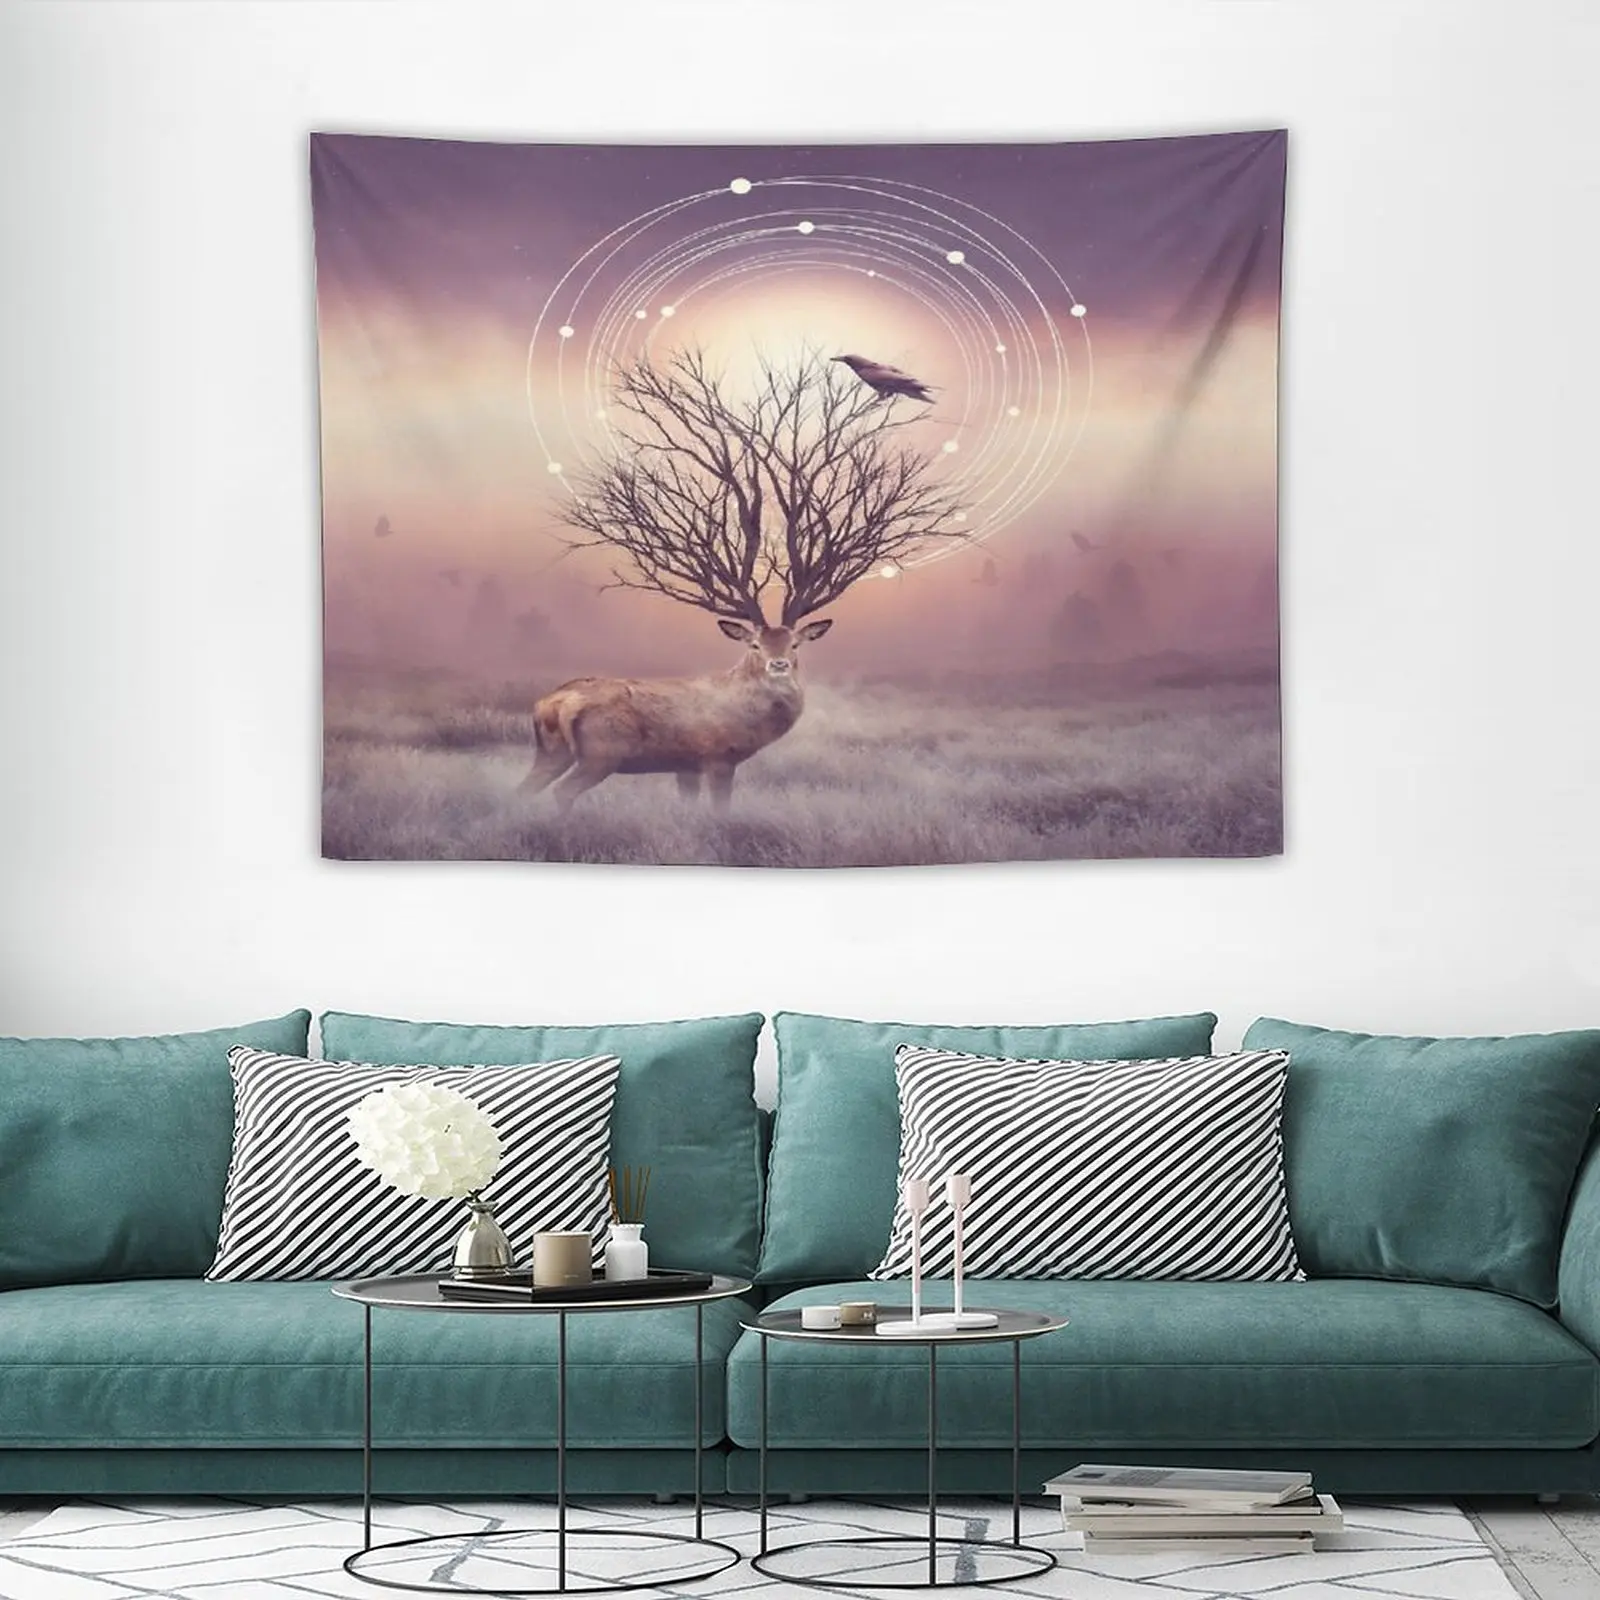 

Tree Tapestry In The Stillness Myth Cloth Ex Room Decoration Aesthetic Wall Decoration Items Goth Room Decor